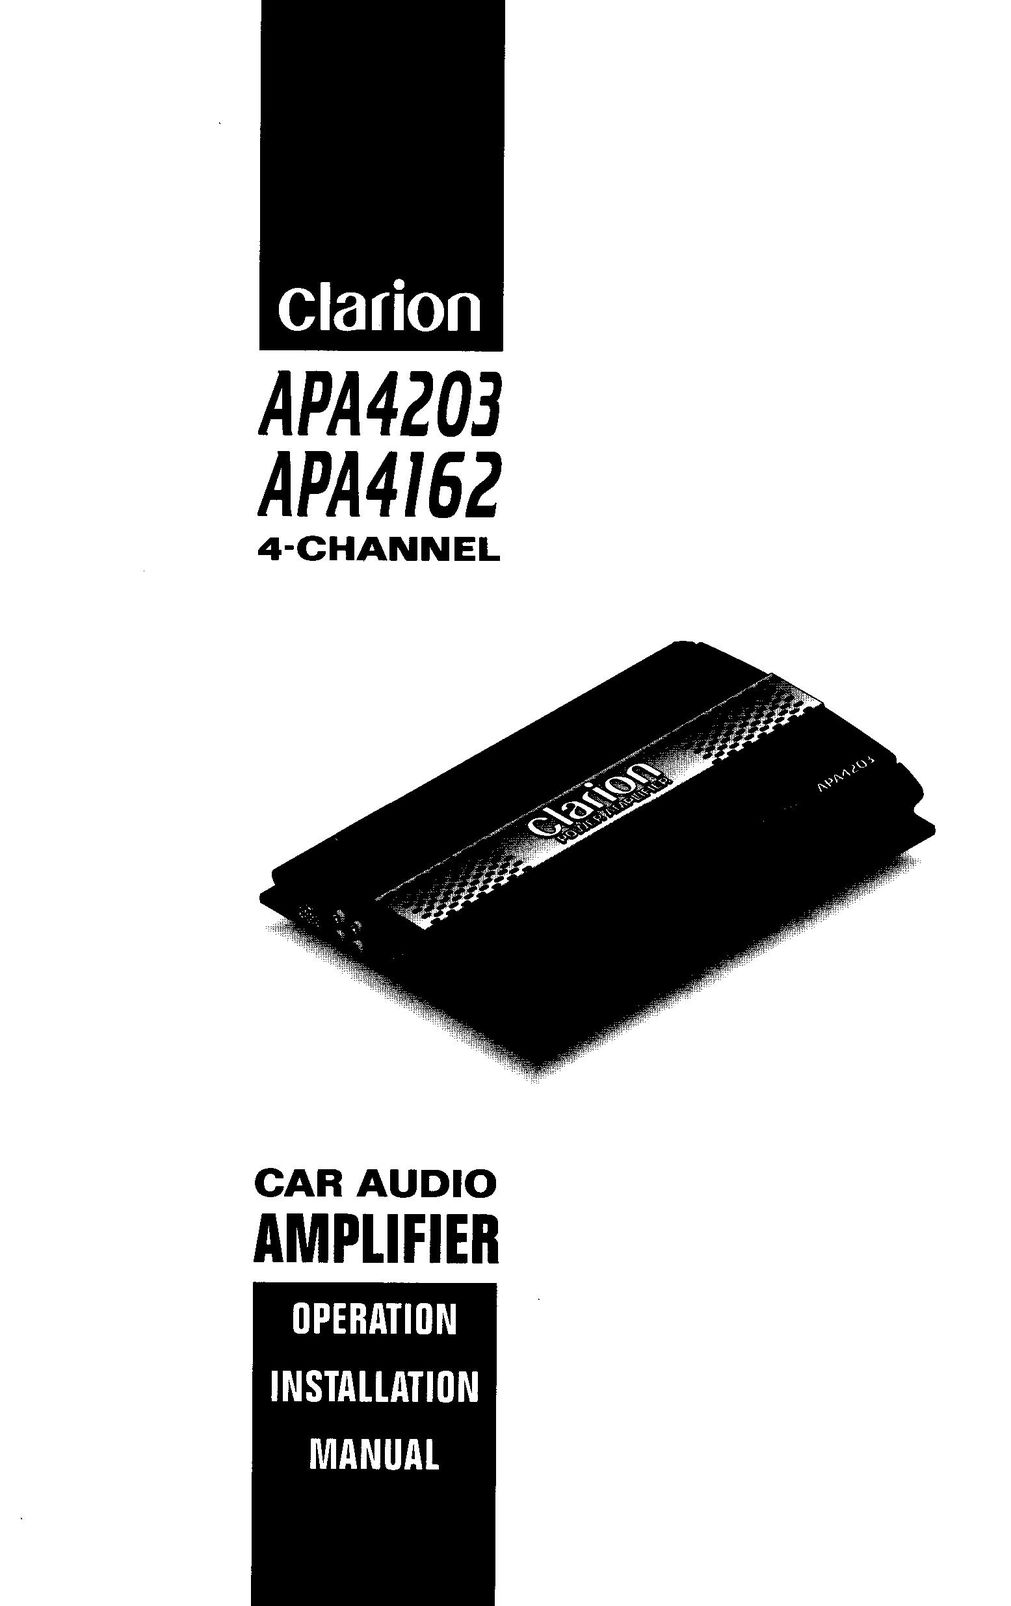 Clarion apa4162 Stereo Amplifier User Manual